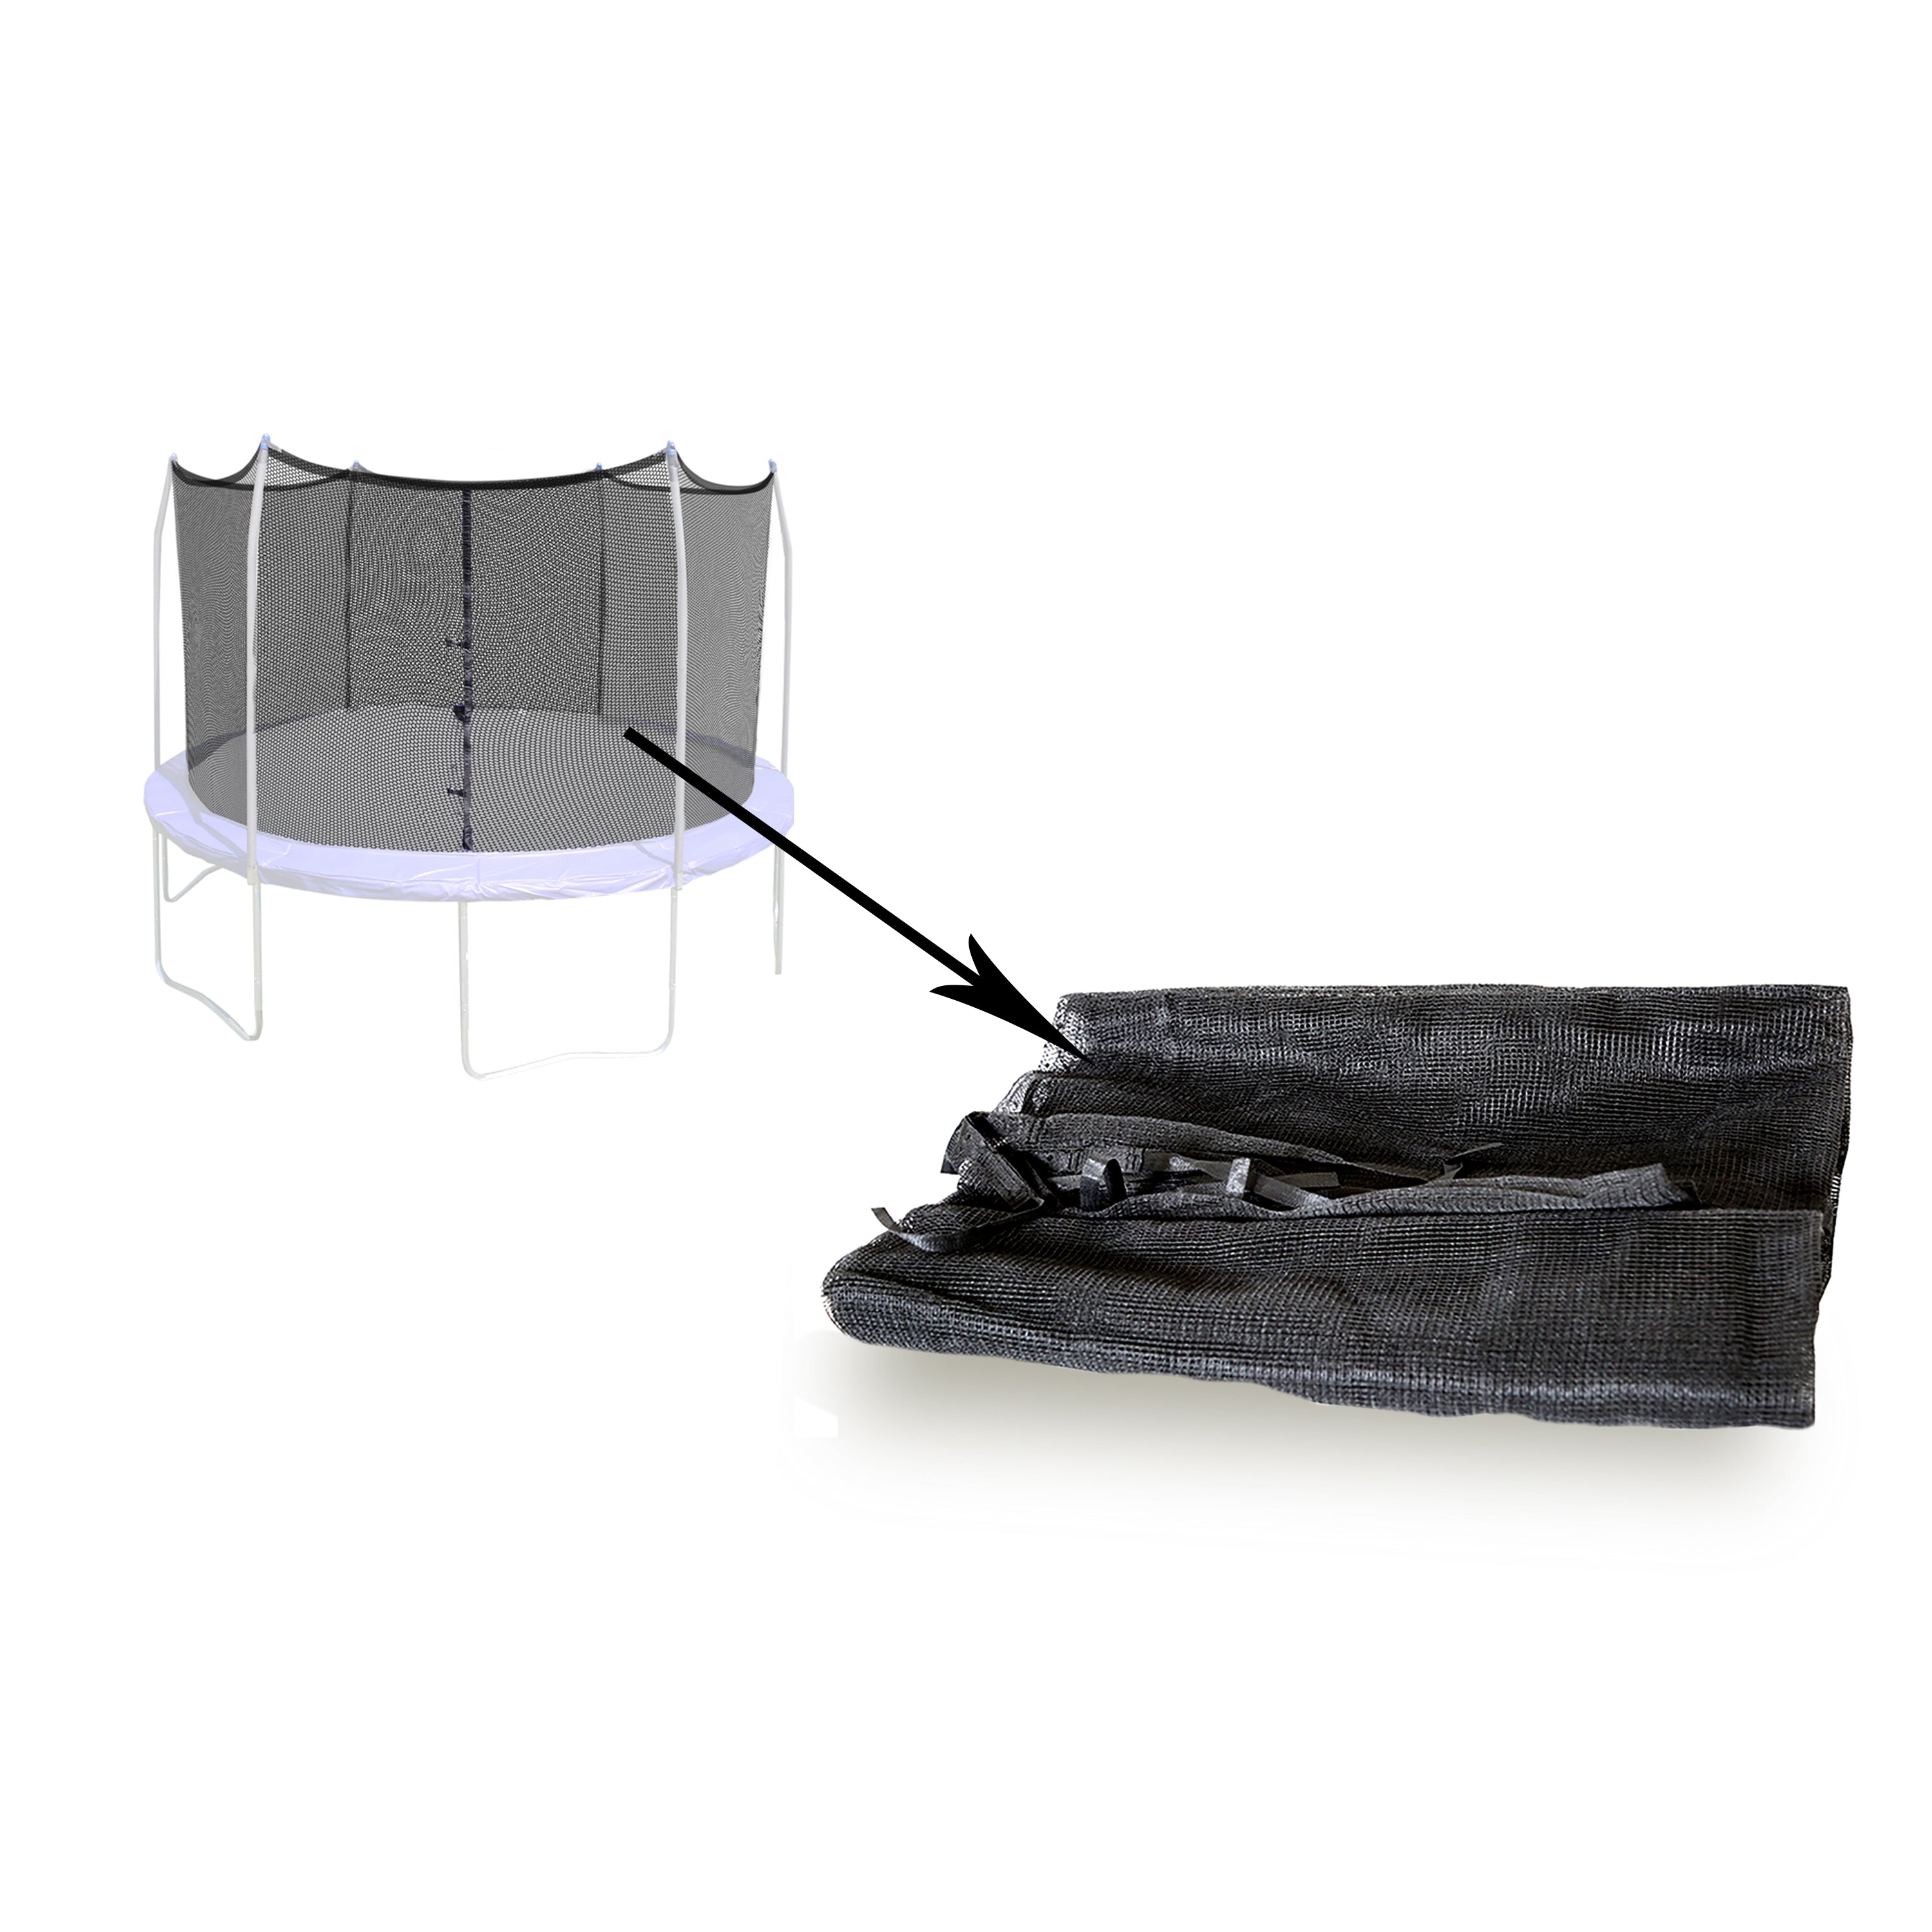 The black polyethylene enclosure net is designed for an 8-foot round trampoline. 